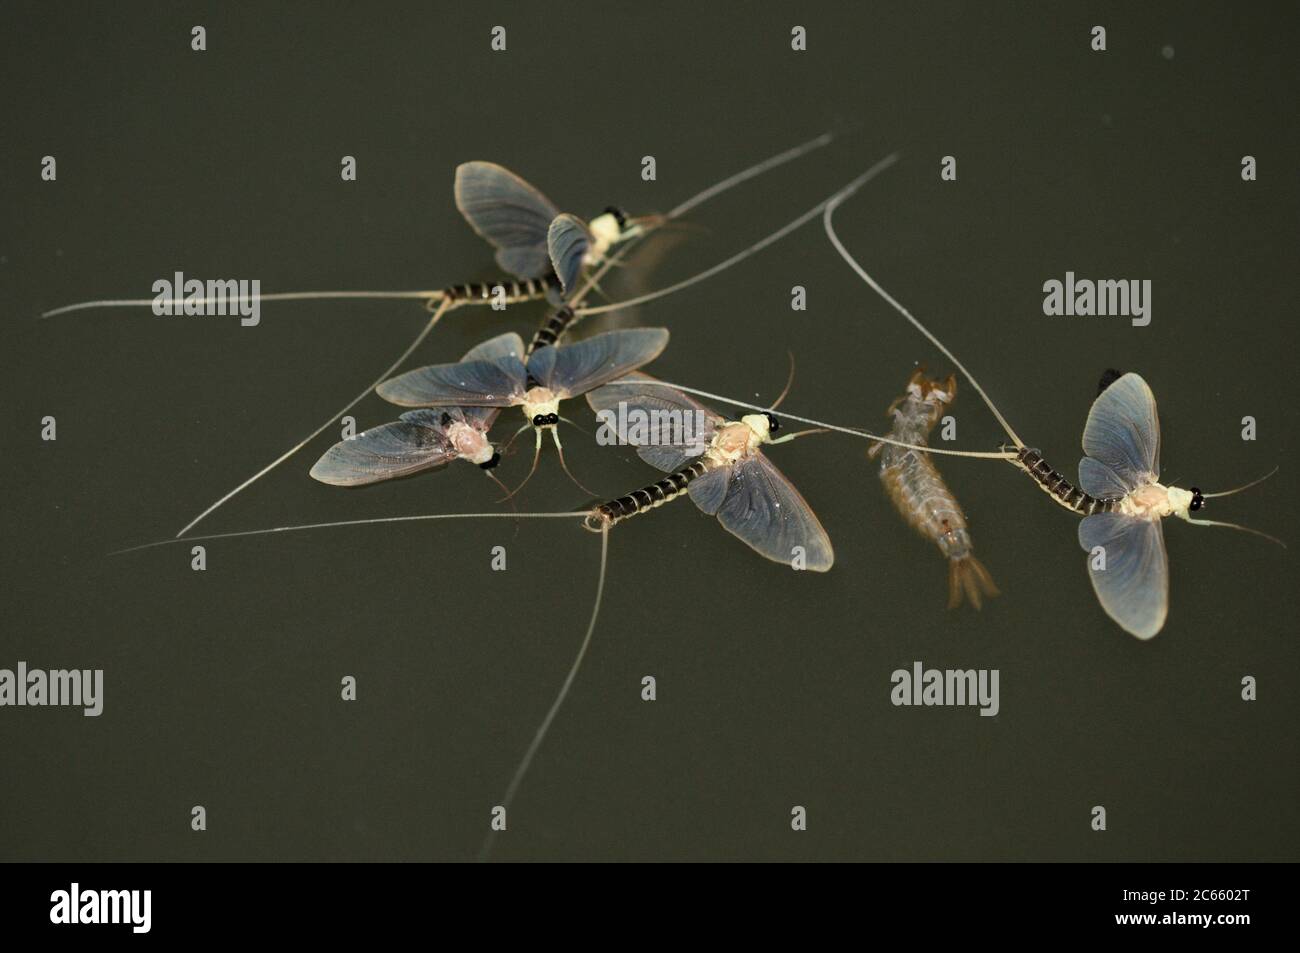 Just three hours after they hatched from the water and moulted into a mature animal, the male long-tailed mayflies (Palingenia longicauda) perish. During theit aquatic larval stages they gathered enough energy to power this short airborne life with the single aim of reproduction. Stock Photo